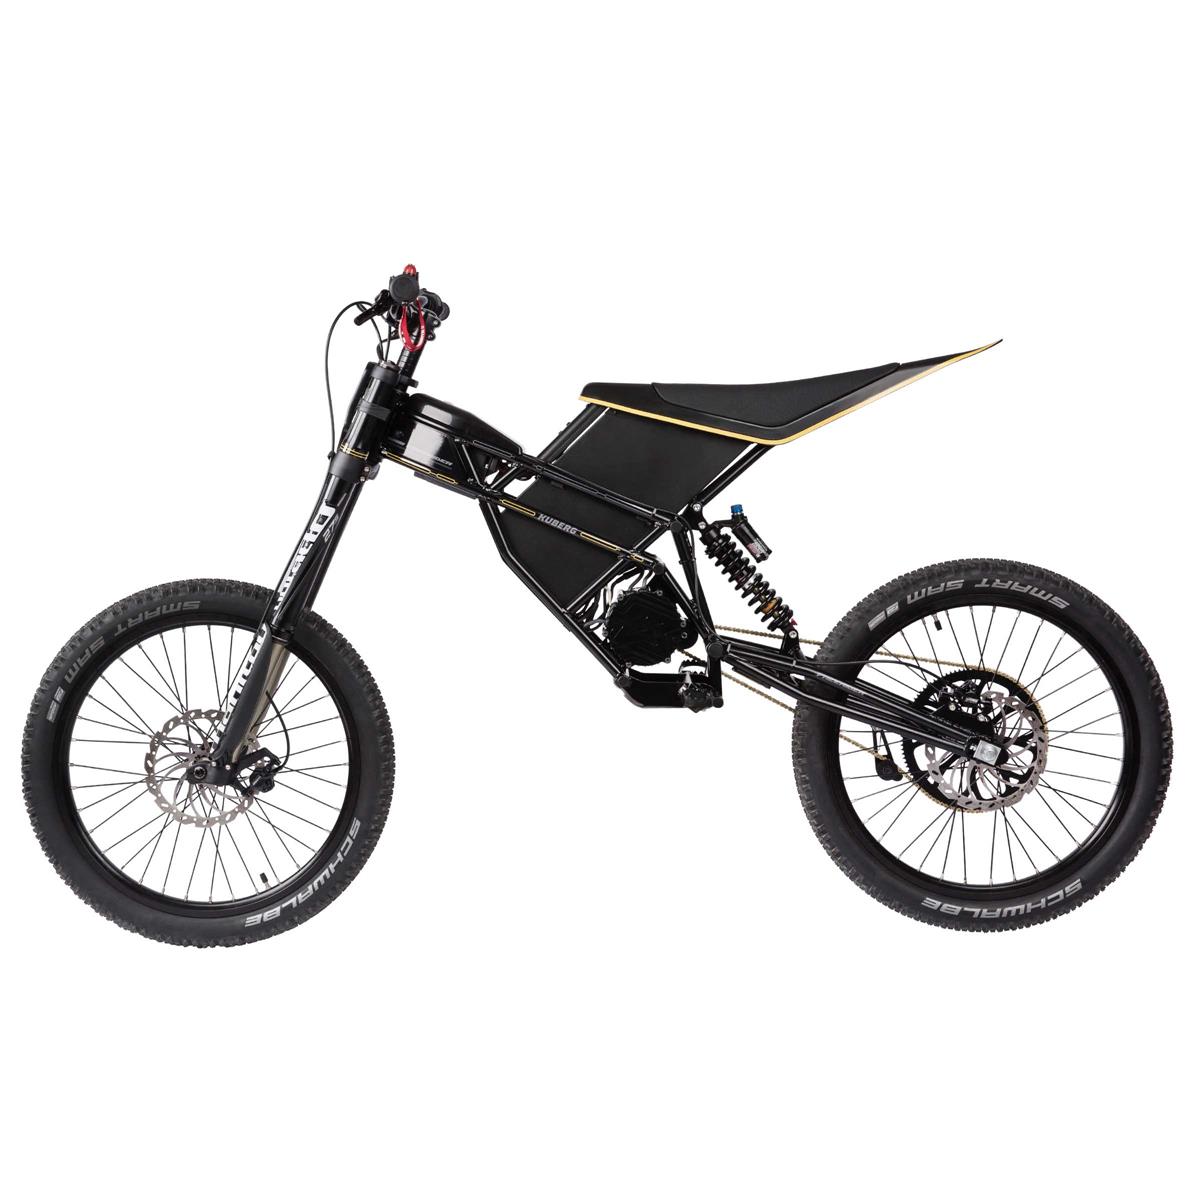 Kuberg Electric Motorcycle Freerider 24 Inches/24 Inches, 8 kW, 12+ Years